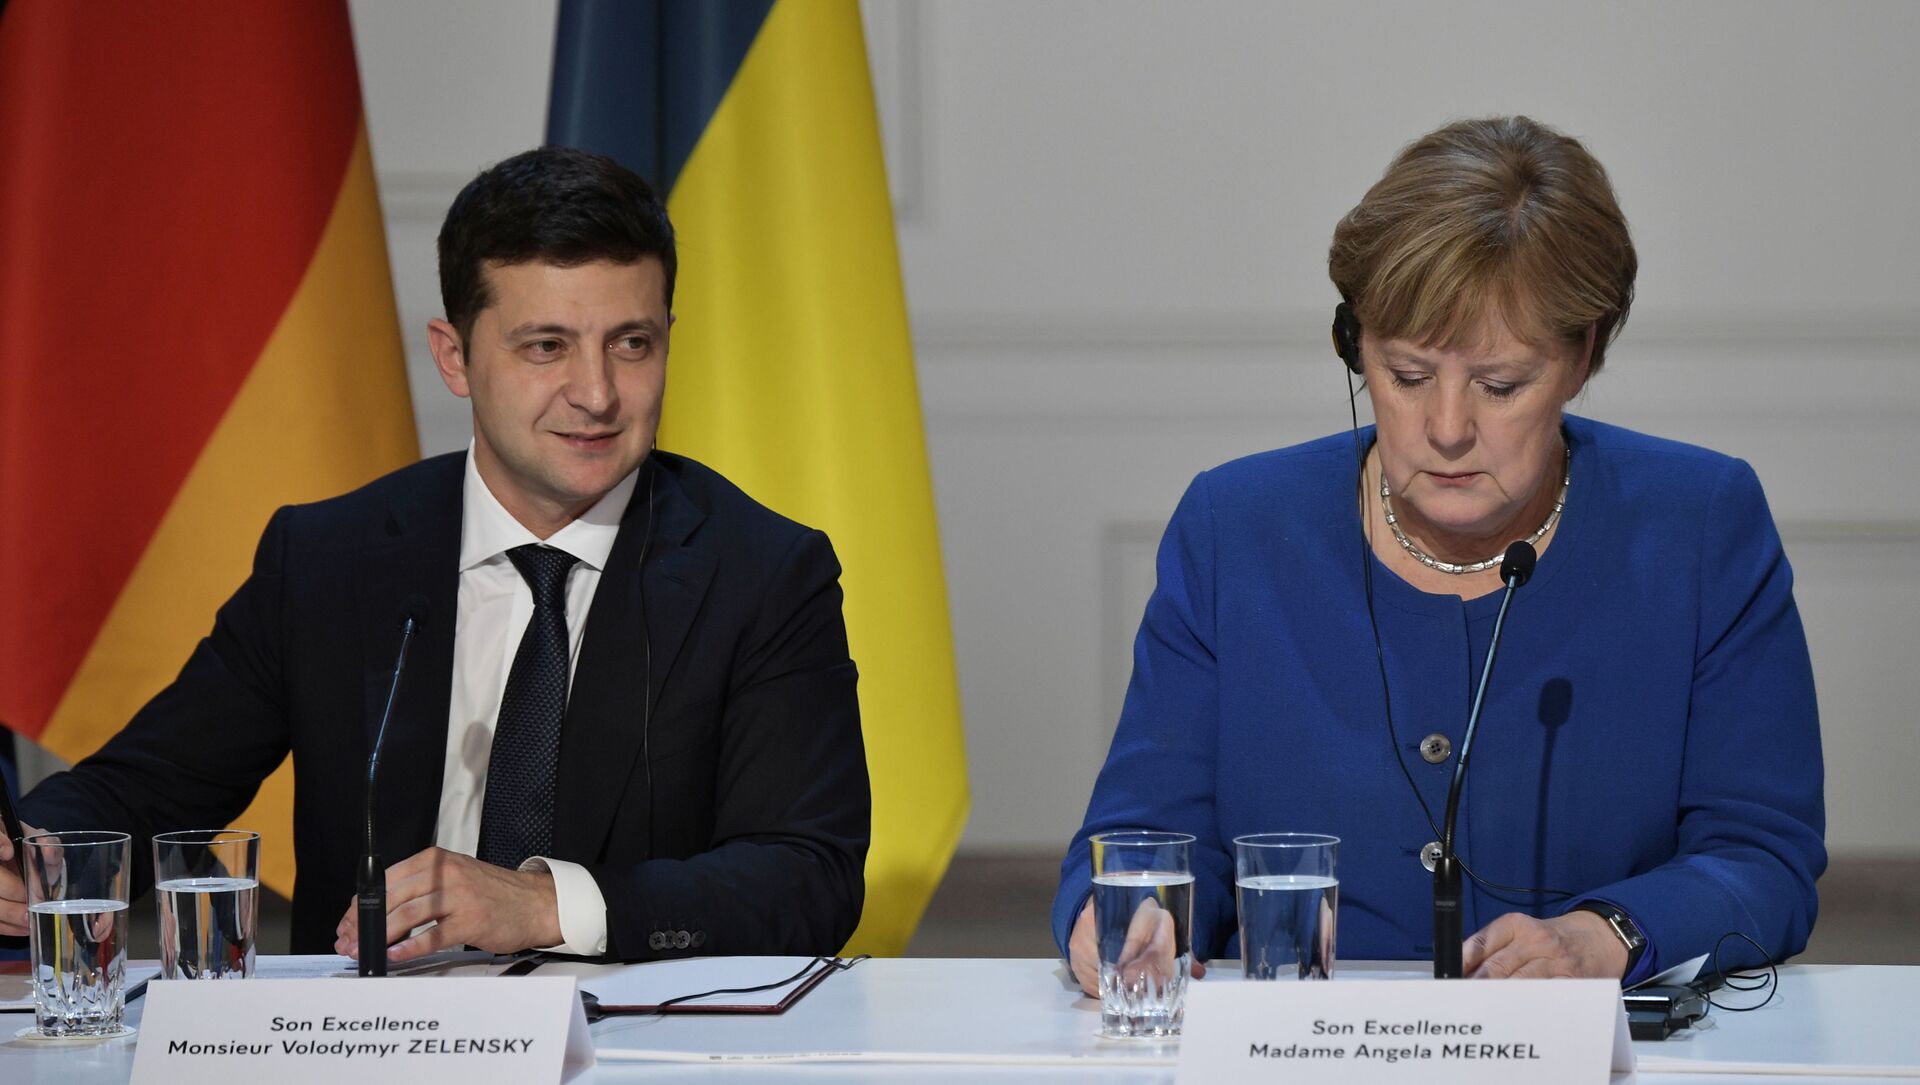 Ukrainian President Volodymyr Zelensky and German Chancellor Angela Merkel attend a joint news conference following a meeting of the Normandy Four leaders at the Elysee Palace in Paris, France. 2019. - Sputnik International, 1920, 10.07.2021